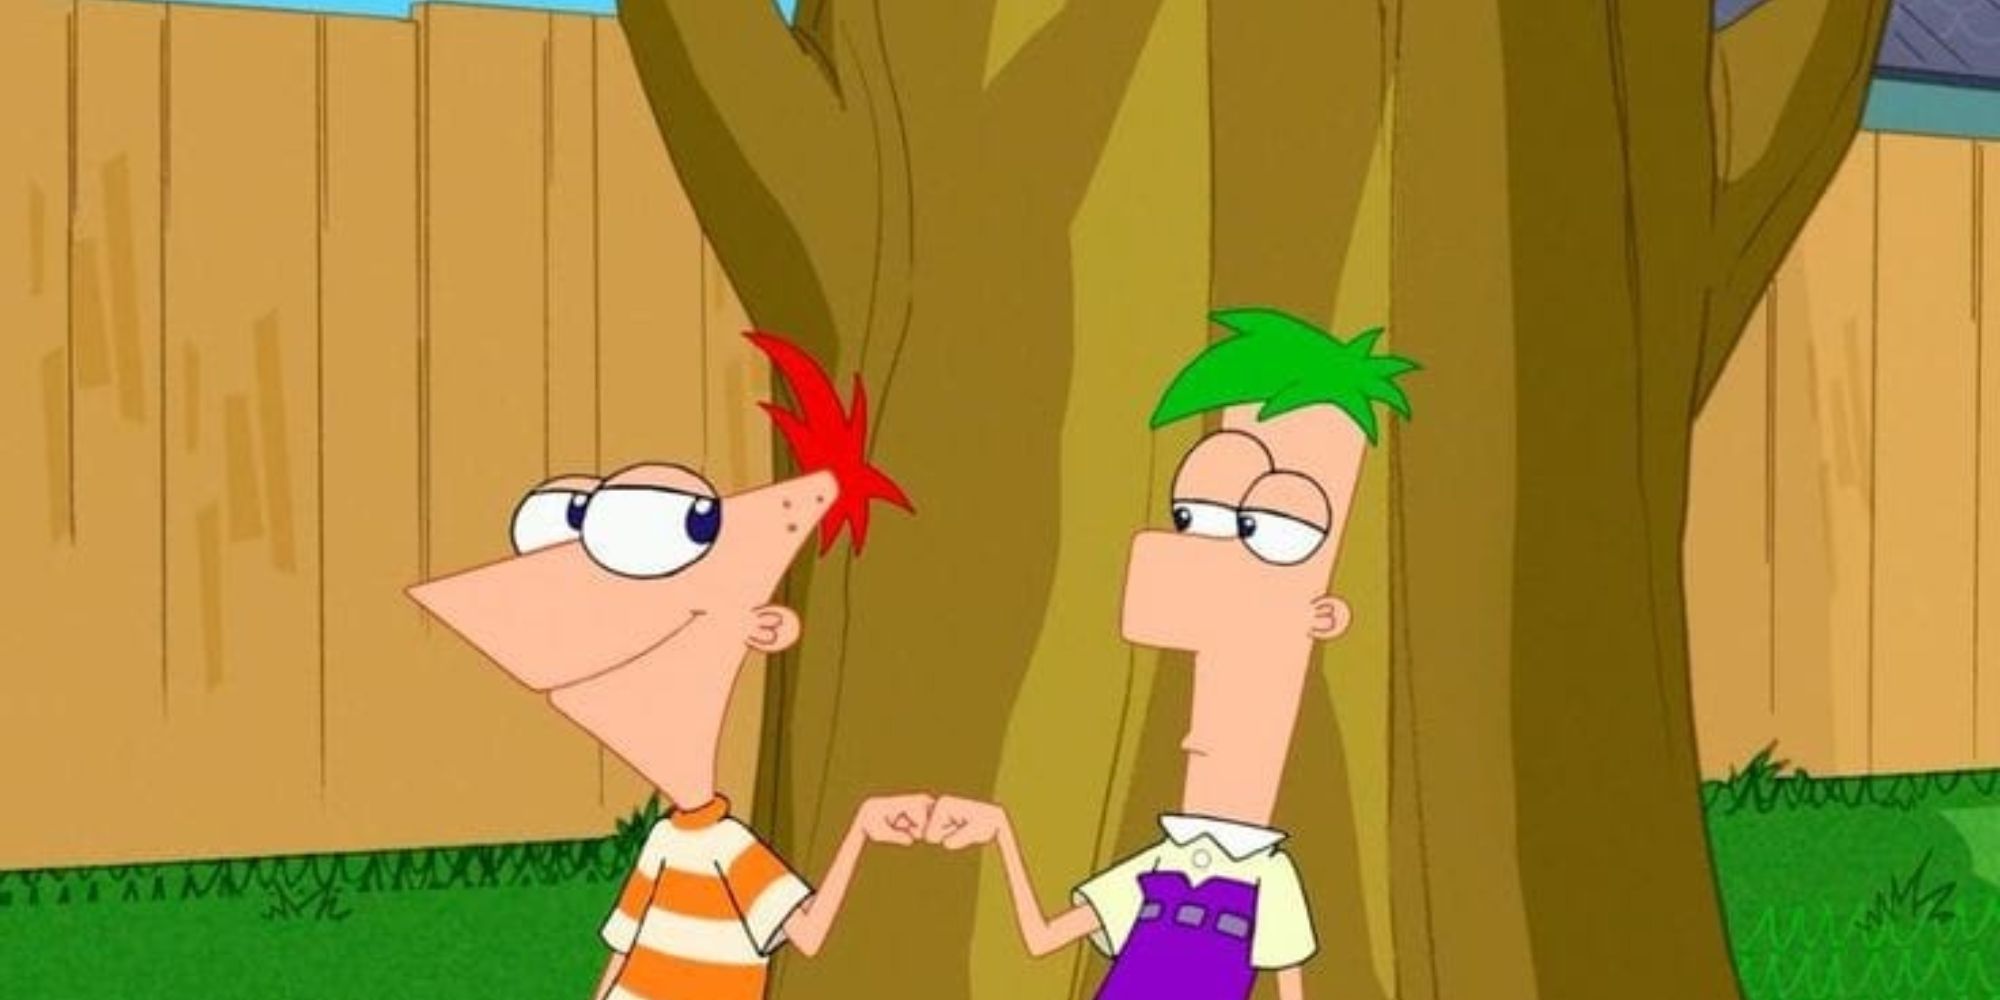 Phineas and Ferb fist bumping